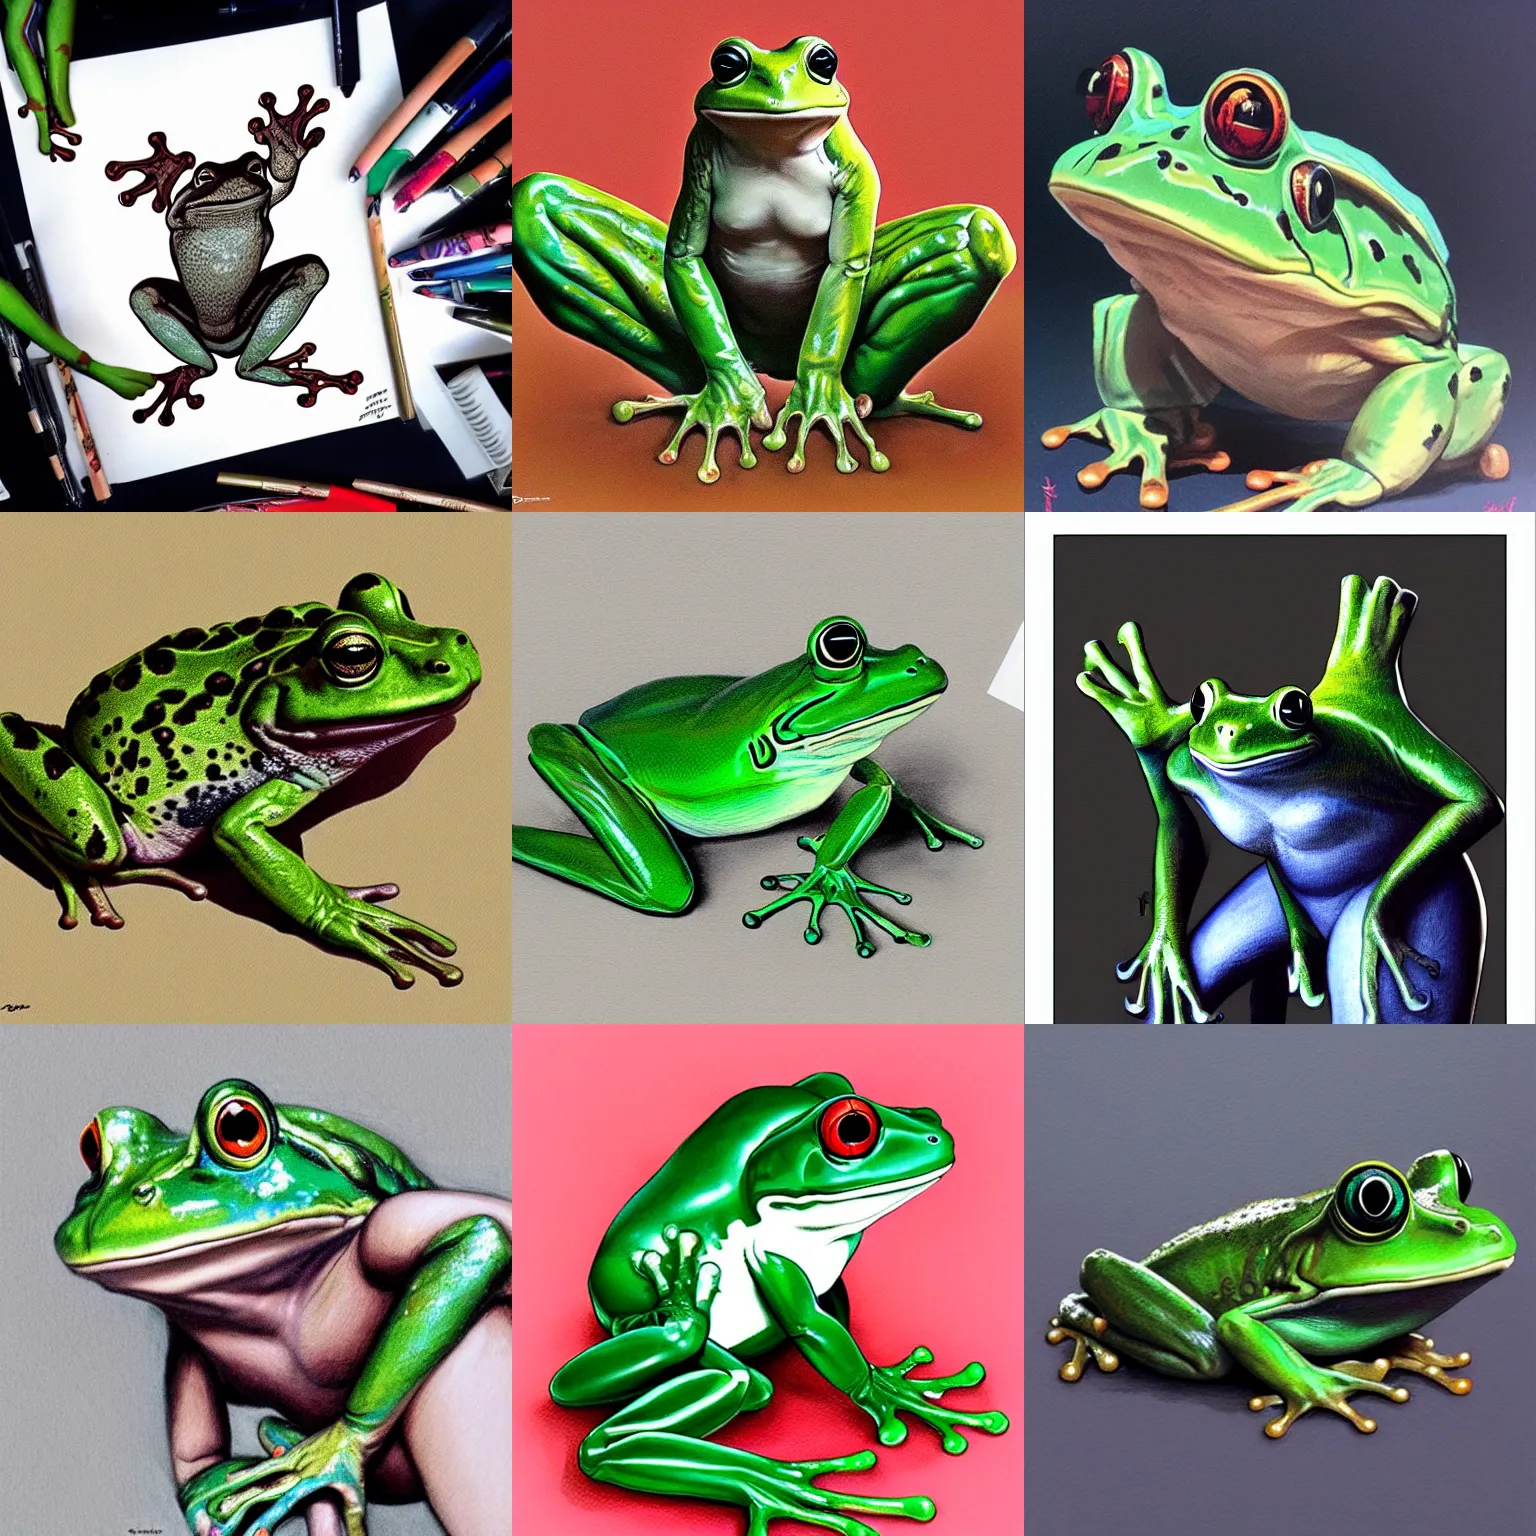 sprite sheet of a frog jumping, isometric view, 3D